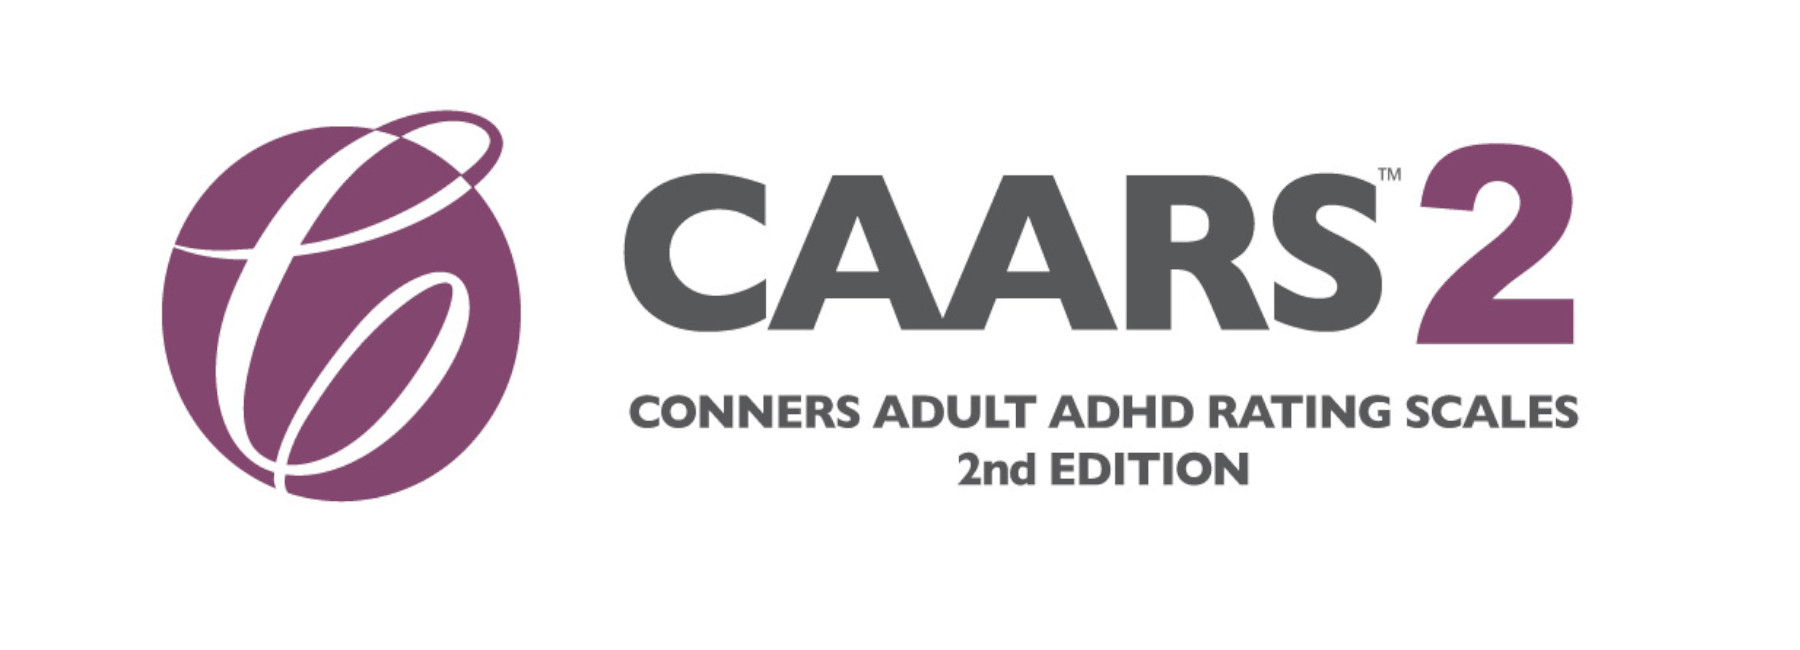 Conners Adult ADHD Rating Scales 2nd Edition (CAARS2)